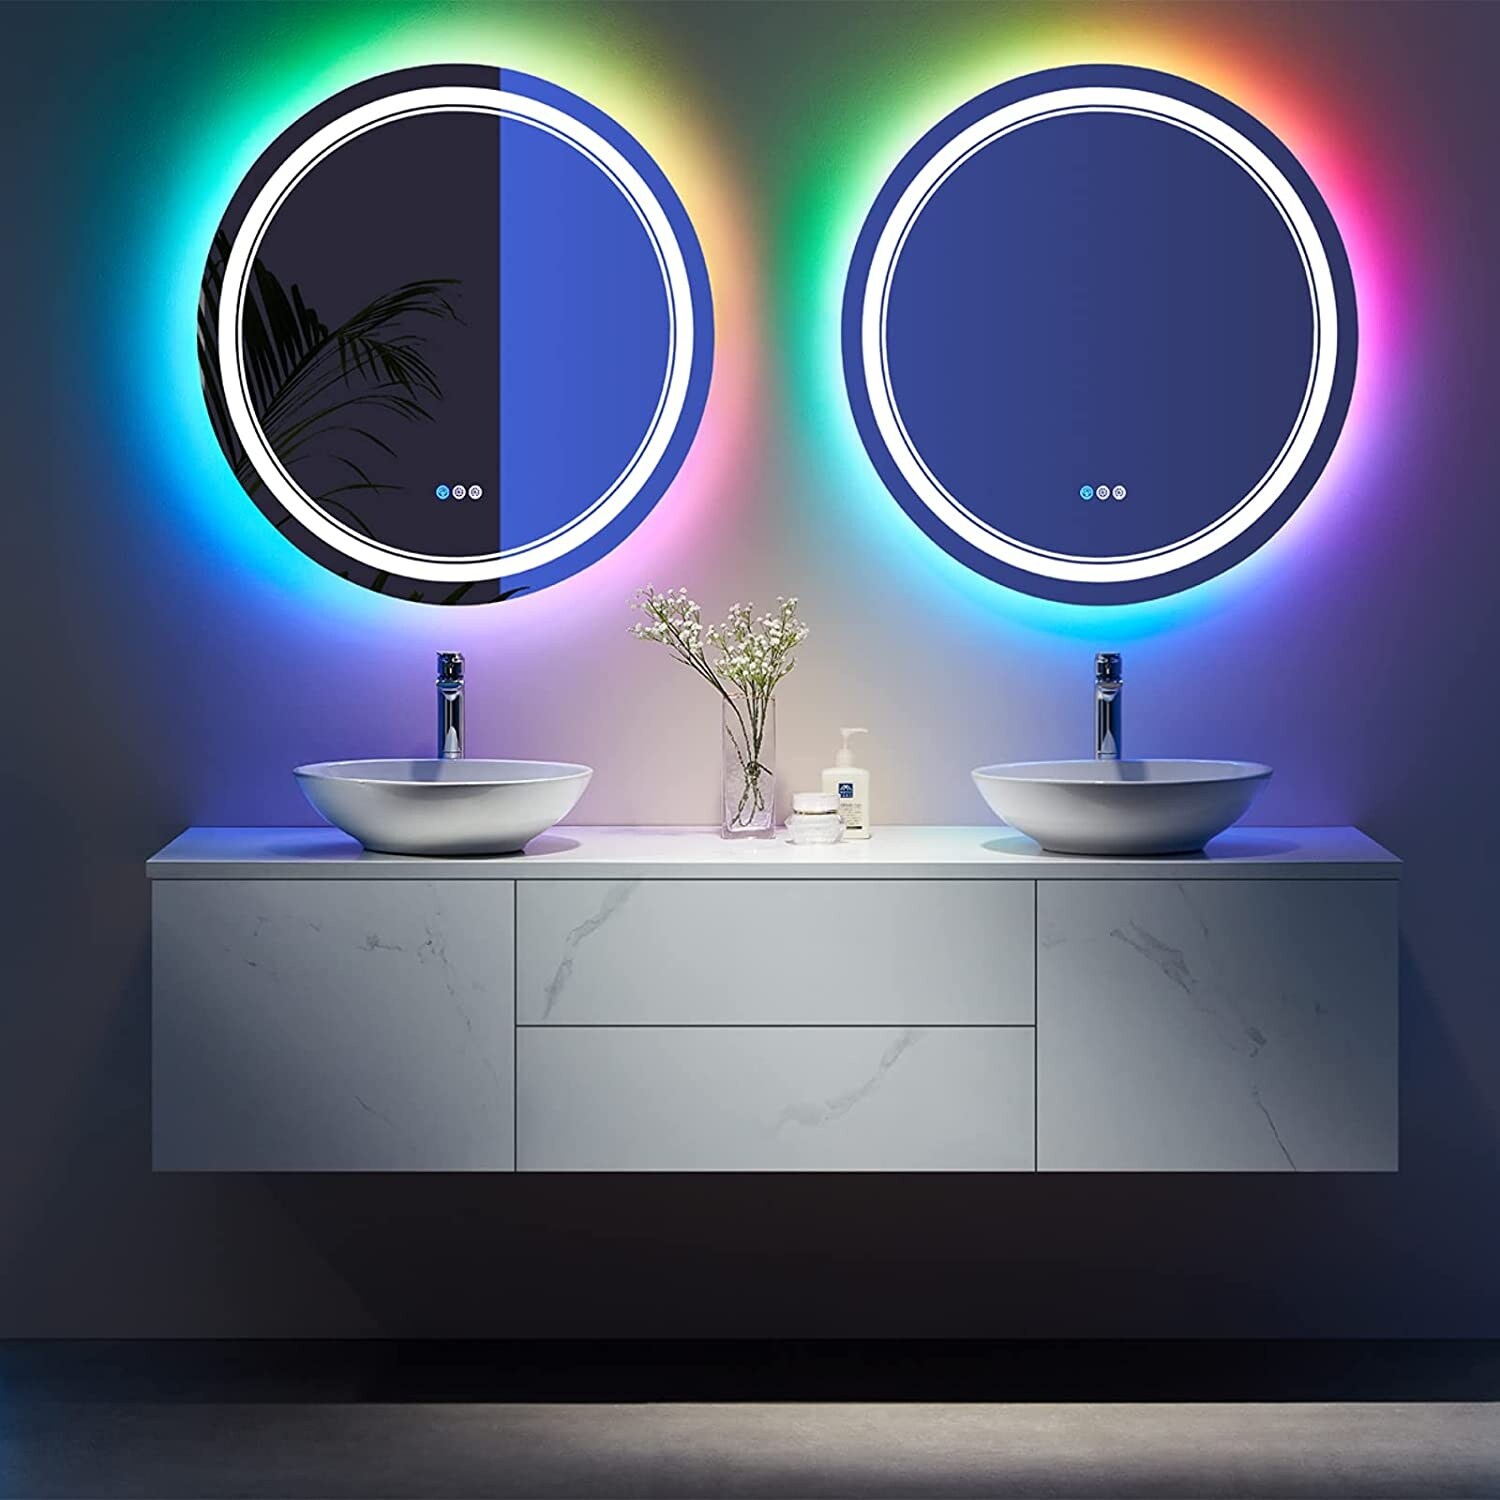 Toolkiss Round Frameless Anti Fog Bathroom Vanity Mirror in RGB Backlit and  Front Lighted On Sale Bed Bath  Beyond 36179349